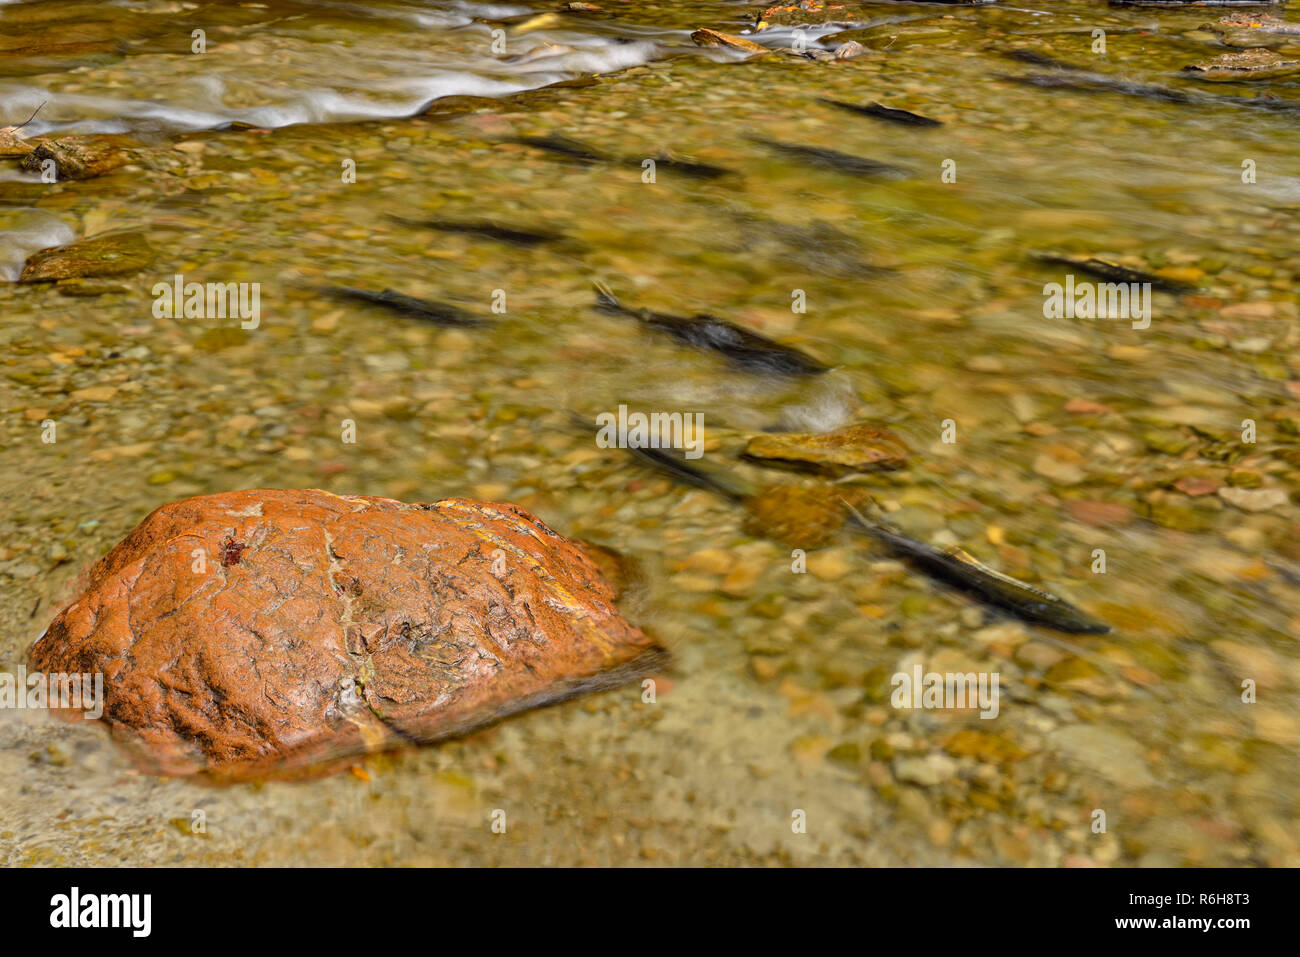 Spawning rainbow trout in the Kagawong River in autumn, Kagawong, Manitoulin Island, Ontario, Canada Stock Photo